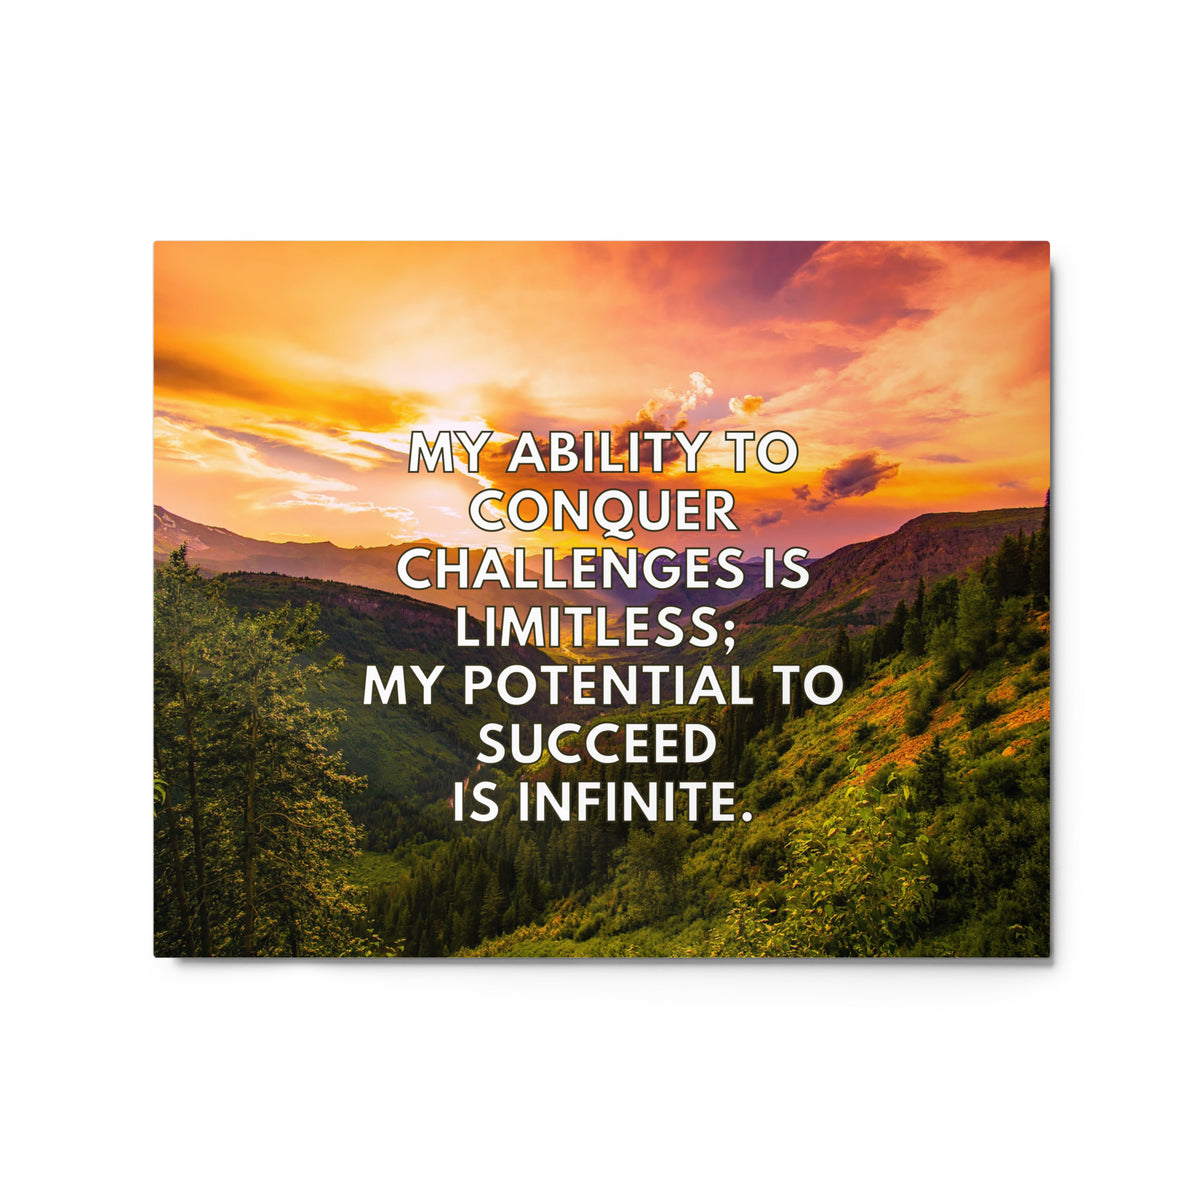 My Ability To Conquer Challenges Is Limitless; My Potential To Succeed Is Infinite. | Glossy Metal Print  Success Acceleration Tools